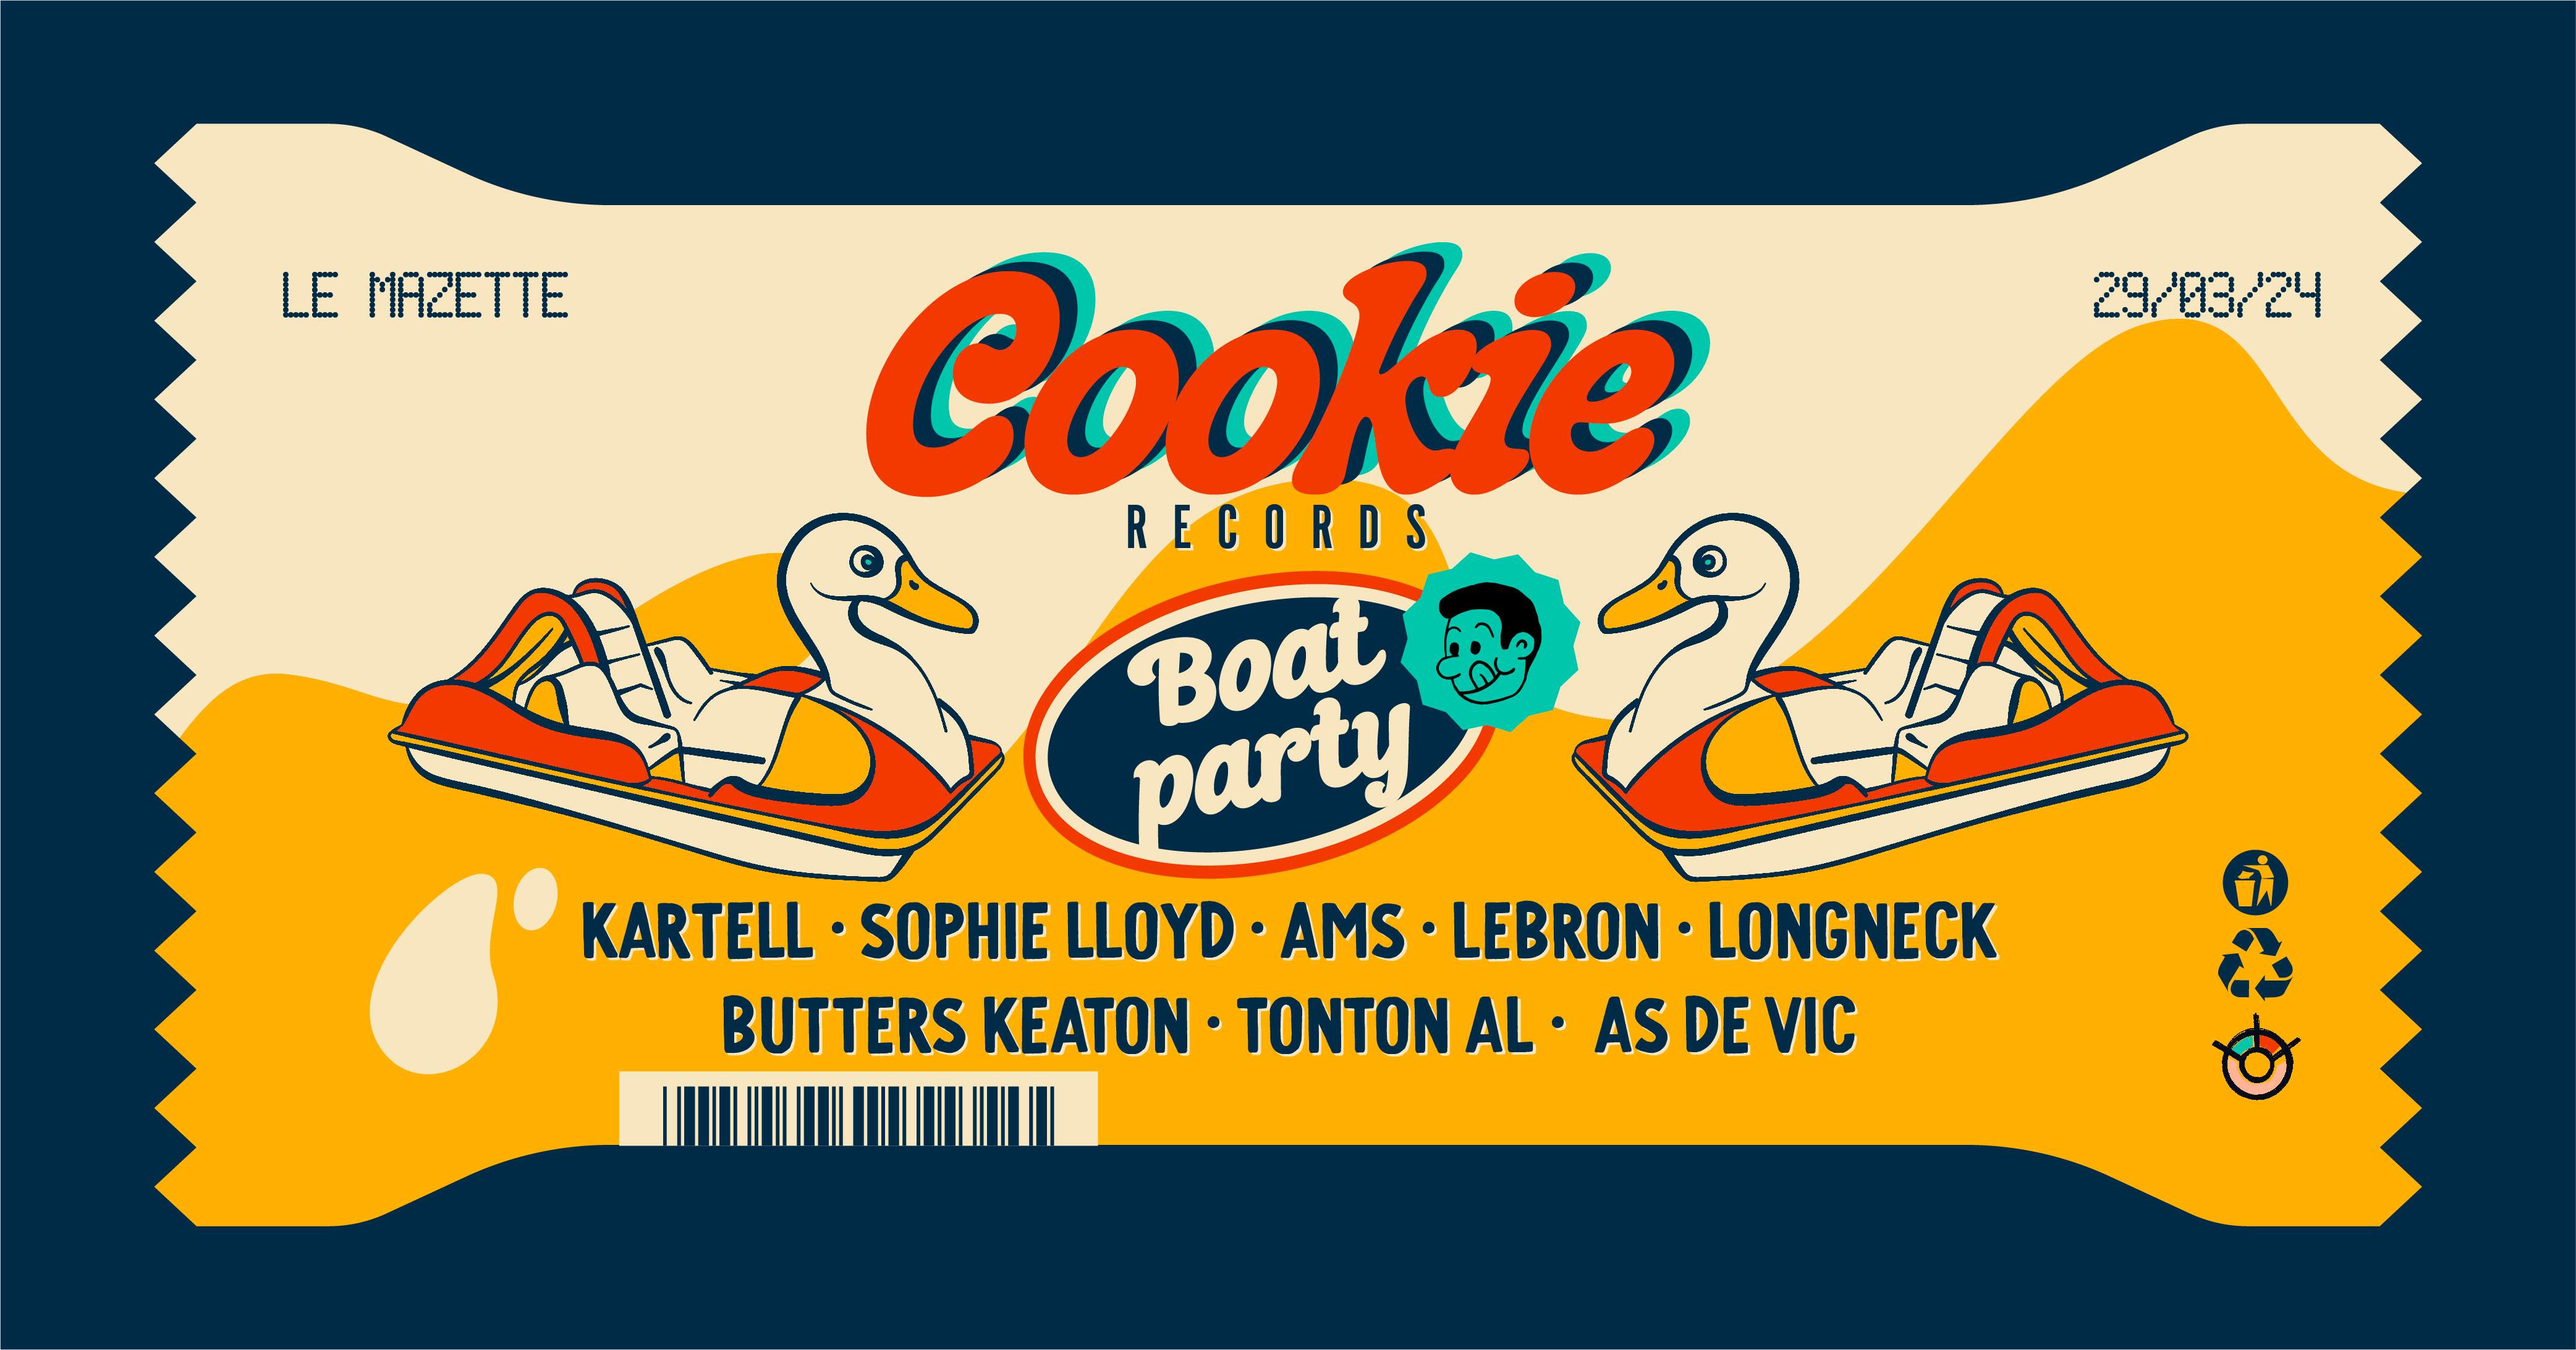 Boat Party • Cookie records: Kartell, Sophie Lloyd, Ams - フライヤー表